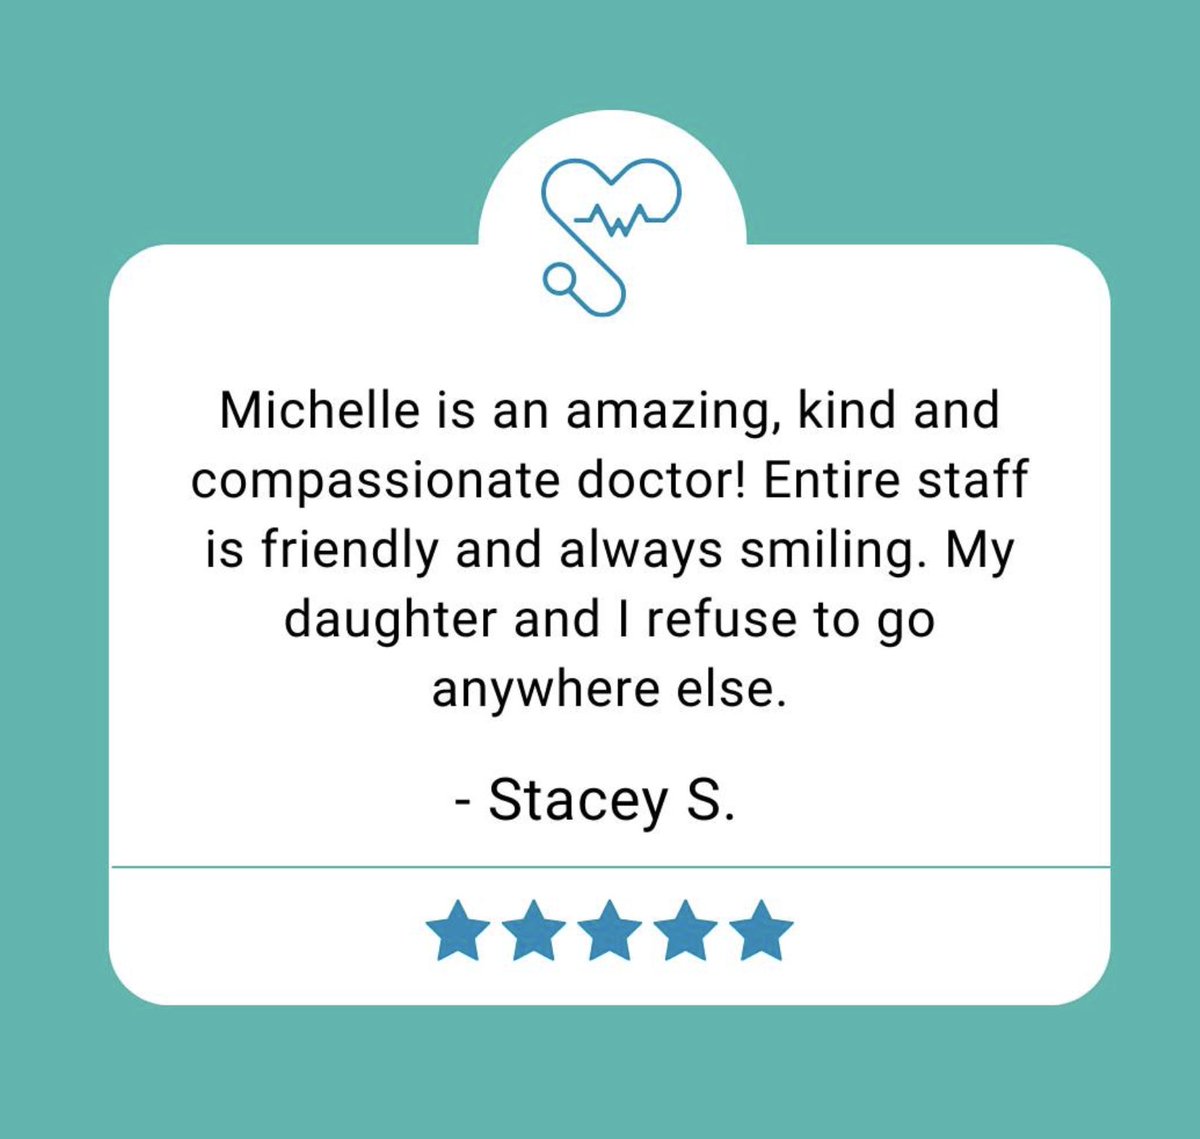 We are so thankful for 5-star reviews from our amazing patients.

Fleur de Lis Healthcare of Cankton 
Appointments: (337) 668-4141
376 Main Street 
Cankton, LA 70584
fleurdelisfhc.com

 #5star #FleurDeLisFHC # #Healthcareforall #customersatisfaction #trustworthy #Cankton